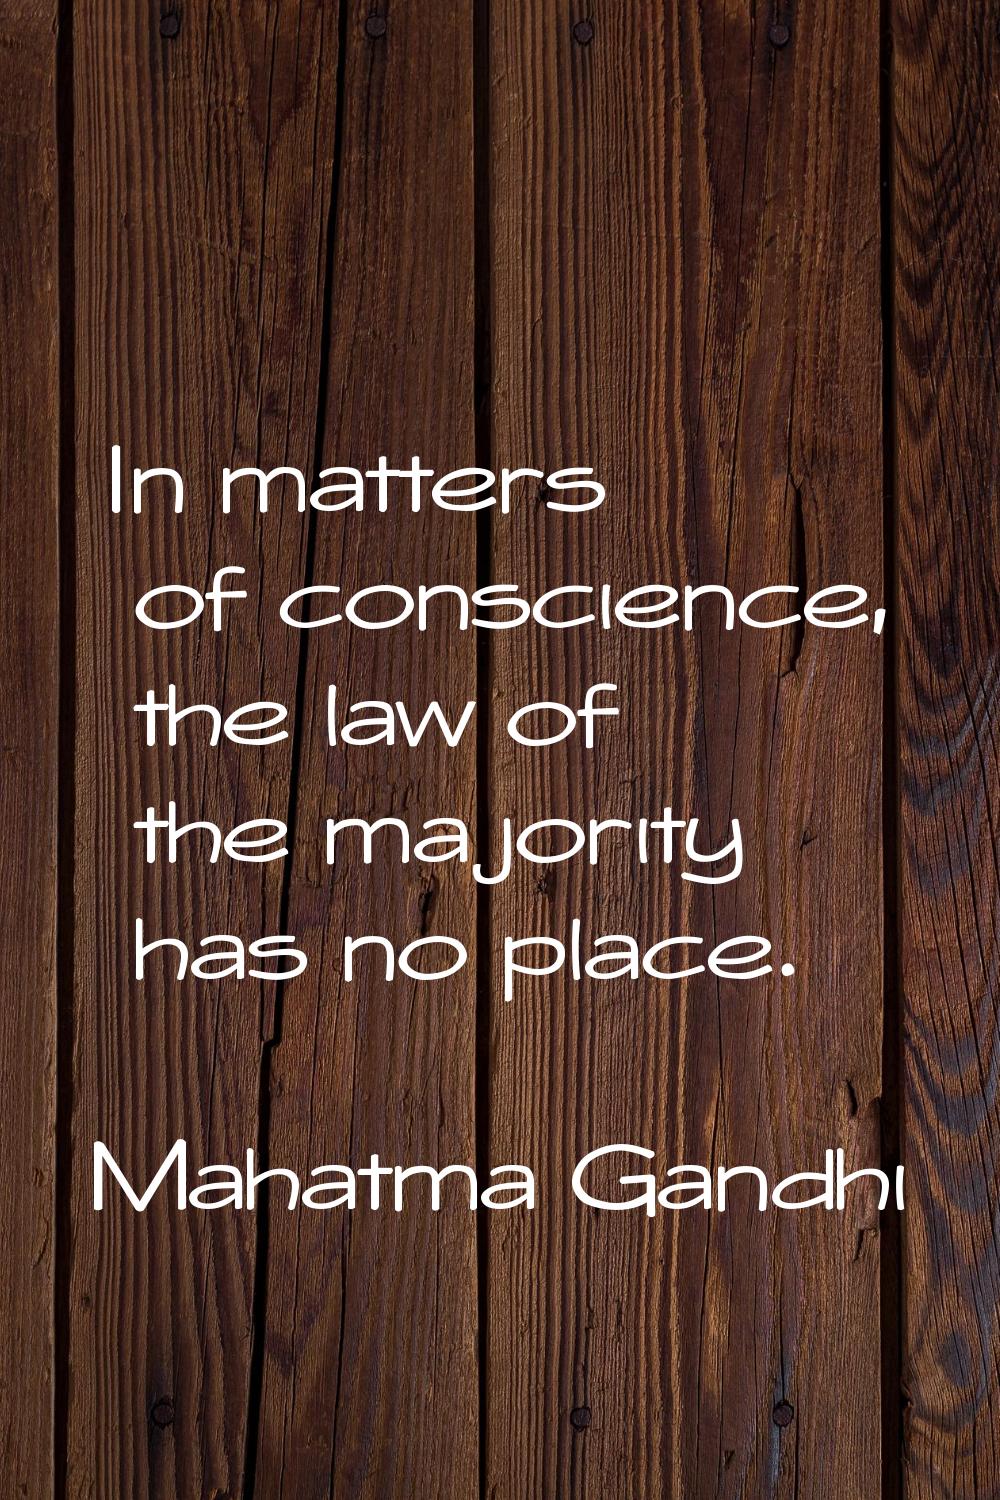 In matters of conscience, the law of the majority has no place.